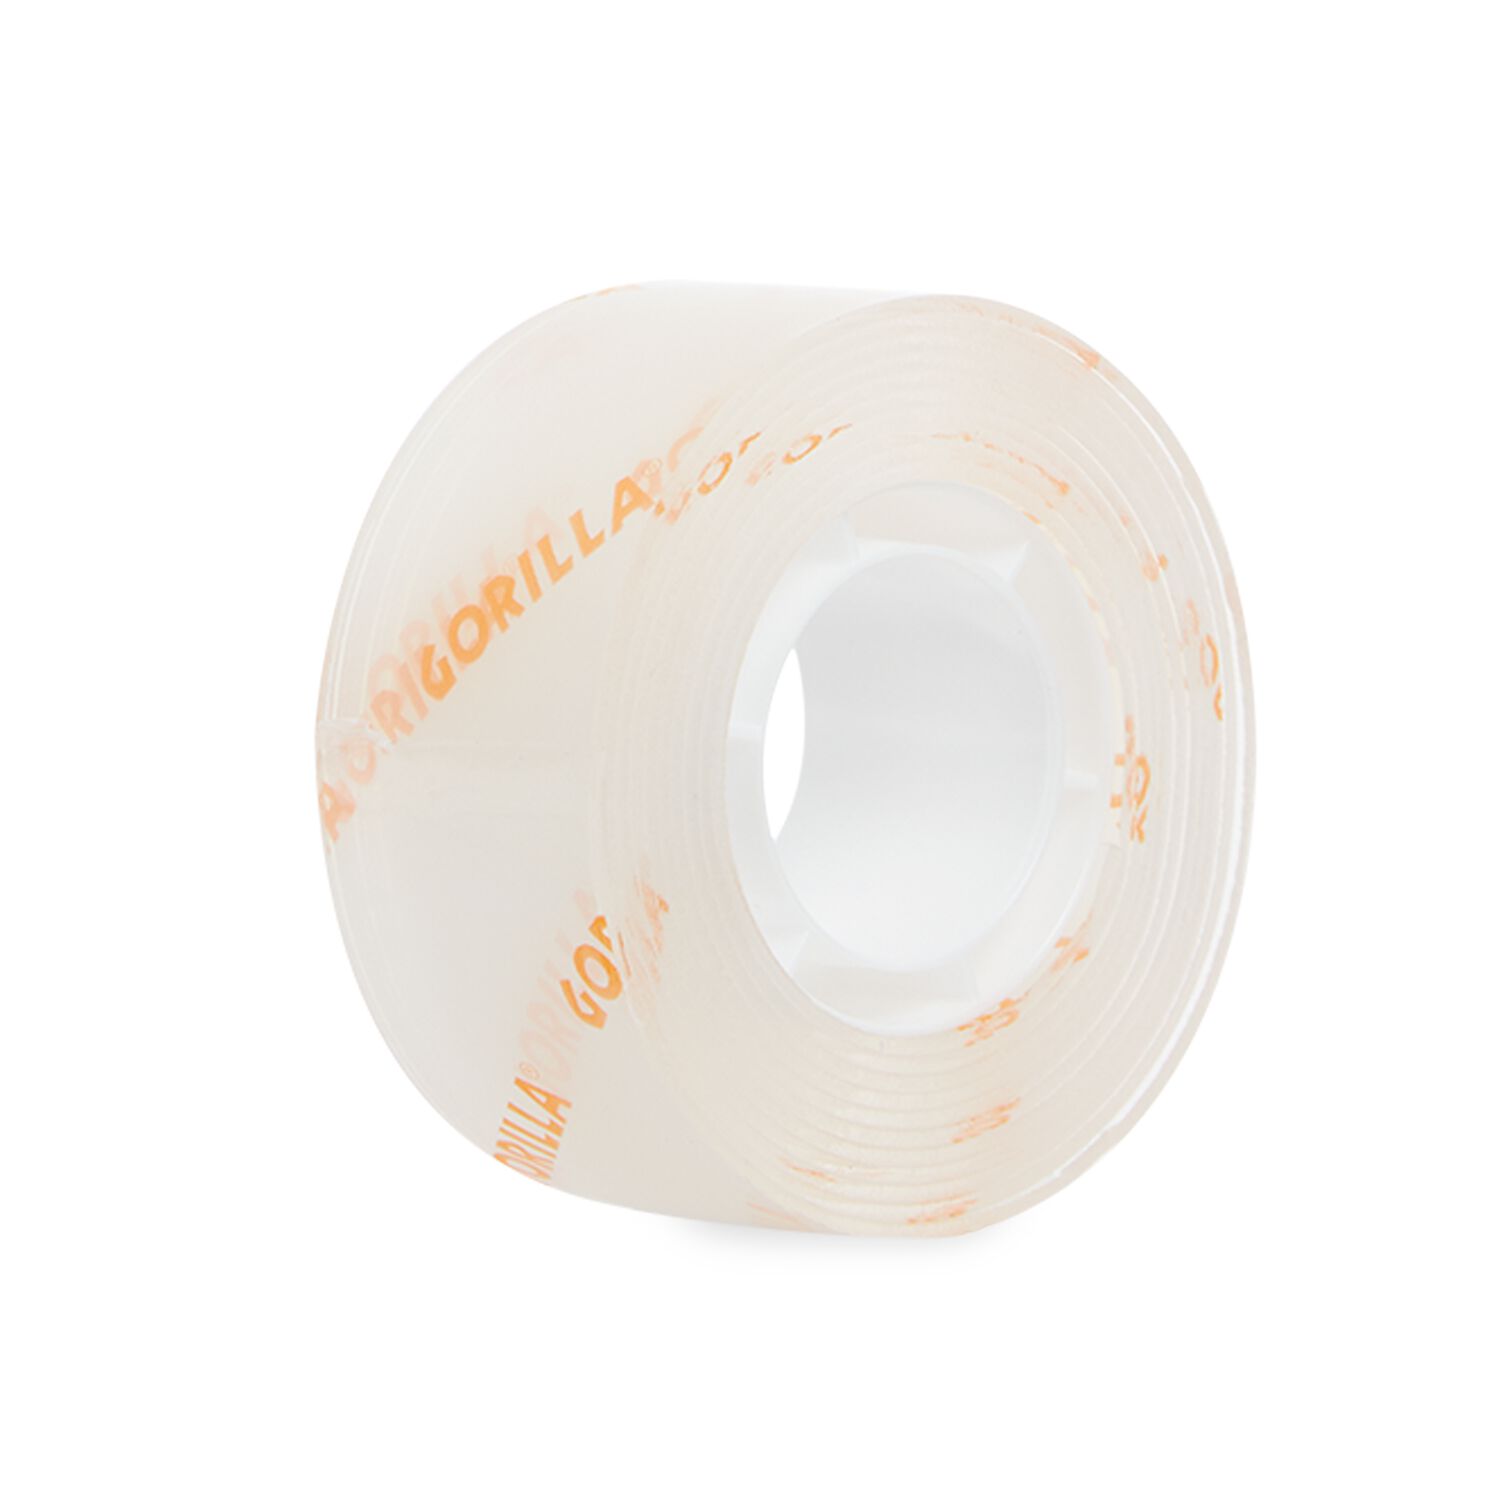 Gorilla Clear Mounting Double Sided Tape 1.5m - Home Store + More